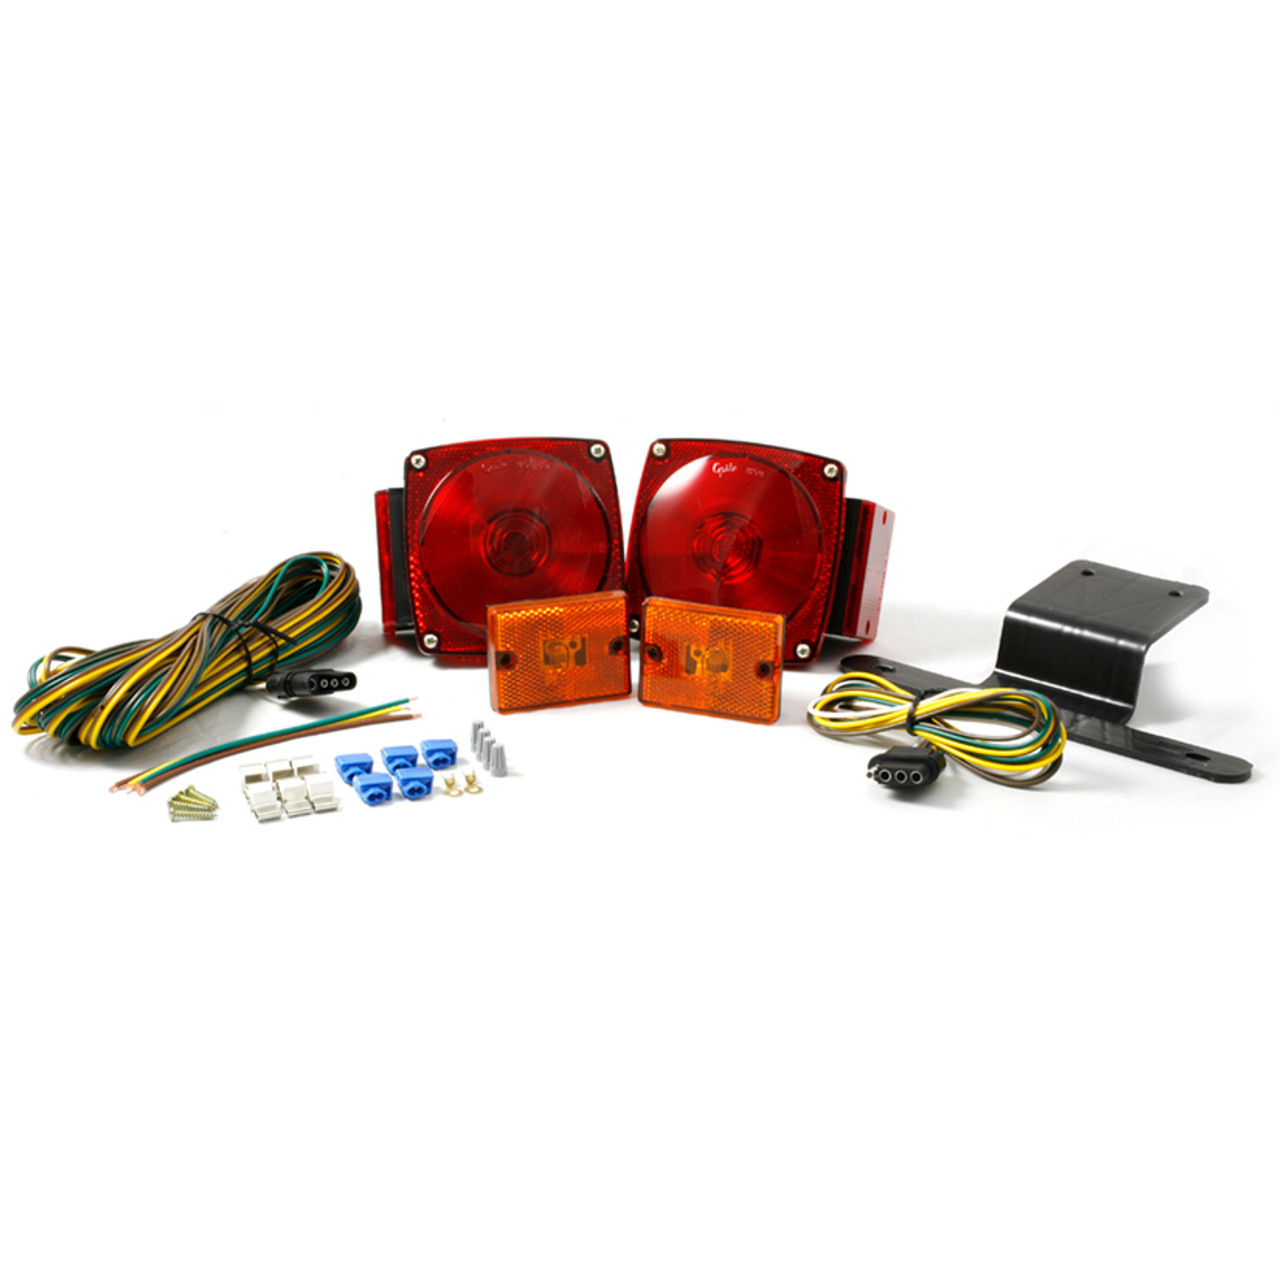 Trailer Lighting Kit w/Clearance/Marker - Retail - Red/Amber  65370-5